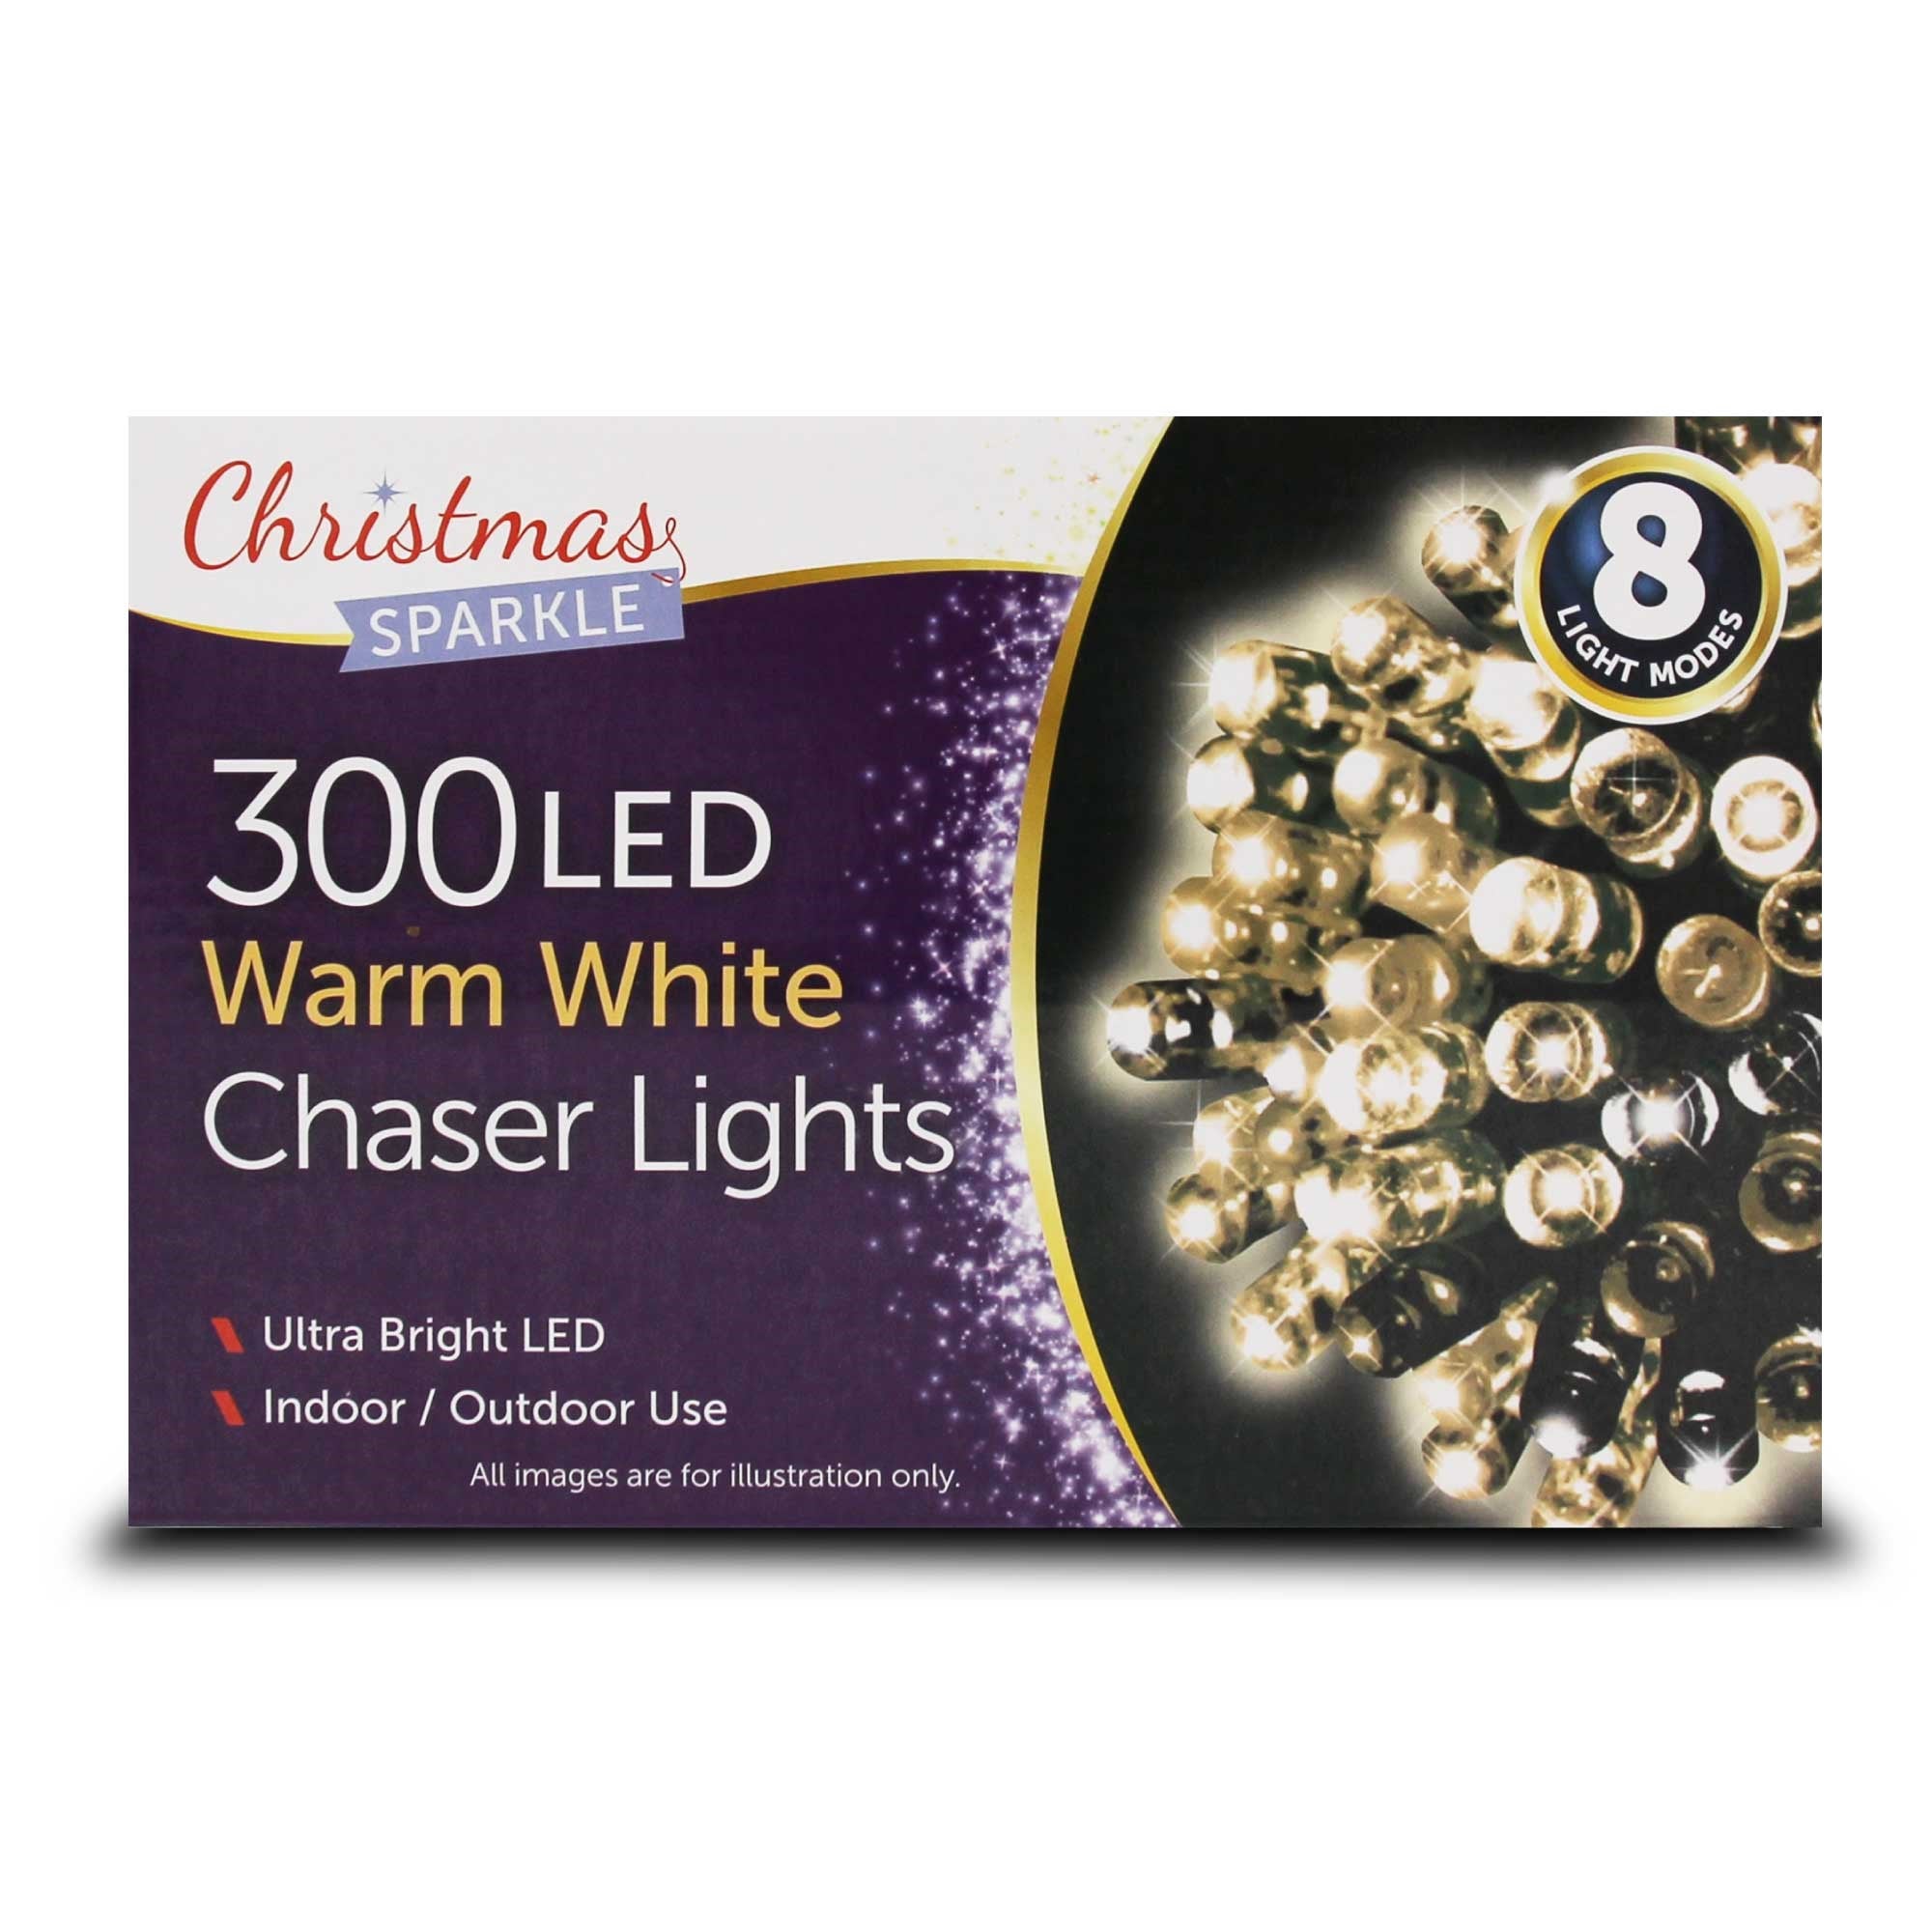 Christmas Sparkle Indoor and Outdoor Chaser Lights x 300 Warm White LEDs - Mains Operated  | TJ Hughes